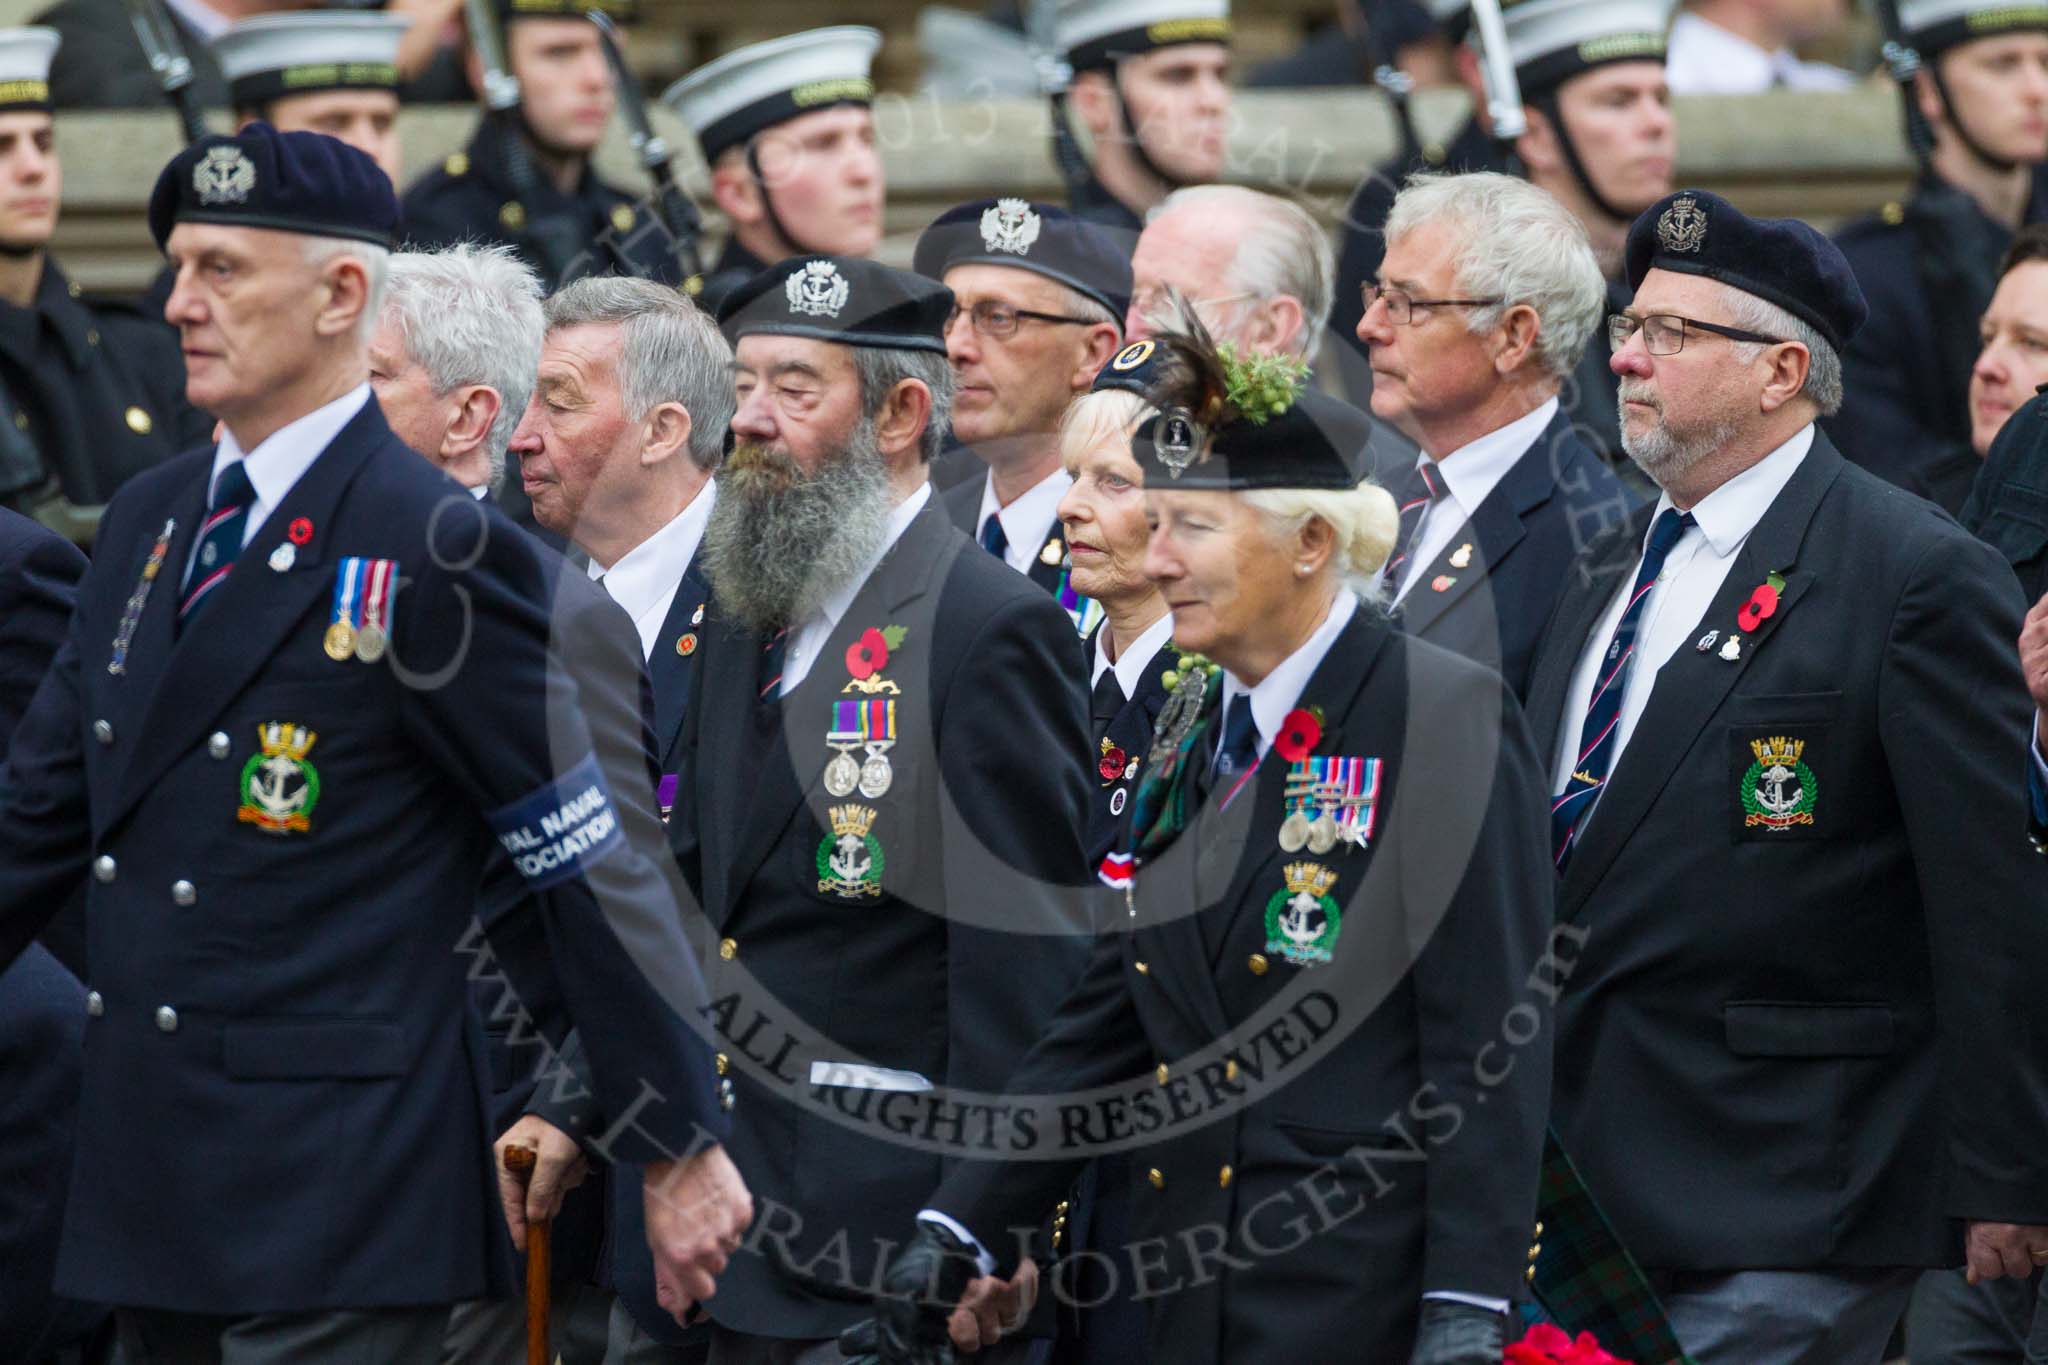 Remembrance Sunday at the Cenotaph 2015: Group E2, Royal Naval Association.
Cenotaph, Whitehall, London SW1,
London,
Greater London,
United Kingdom,
on 08 November 2015 at 11:58, image #806